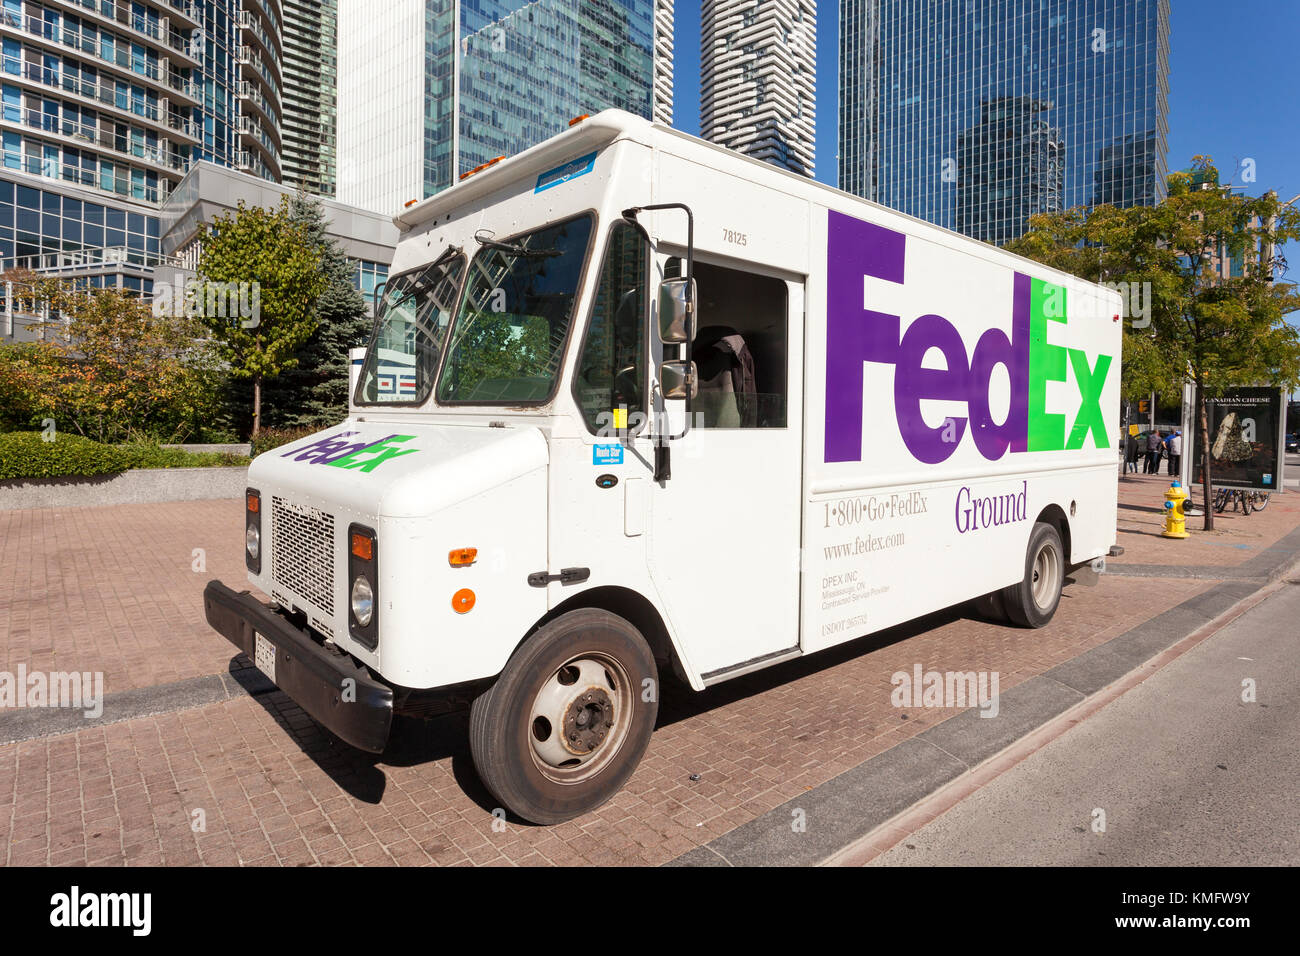 Toronto, Canada - Oct 19, 2017: FedEx Ground delivery truck in the city of Toronto. Province of Ontario, Canada Stock Photo